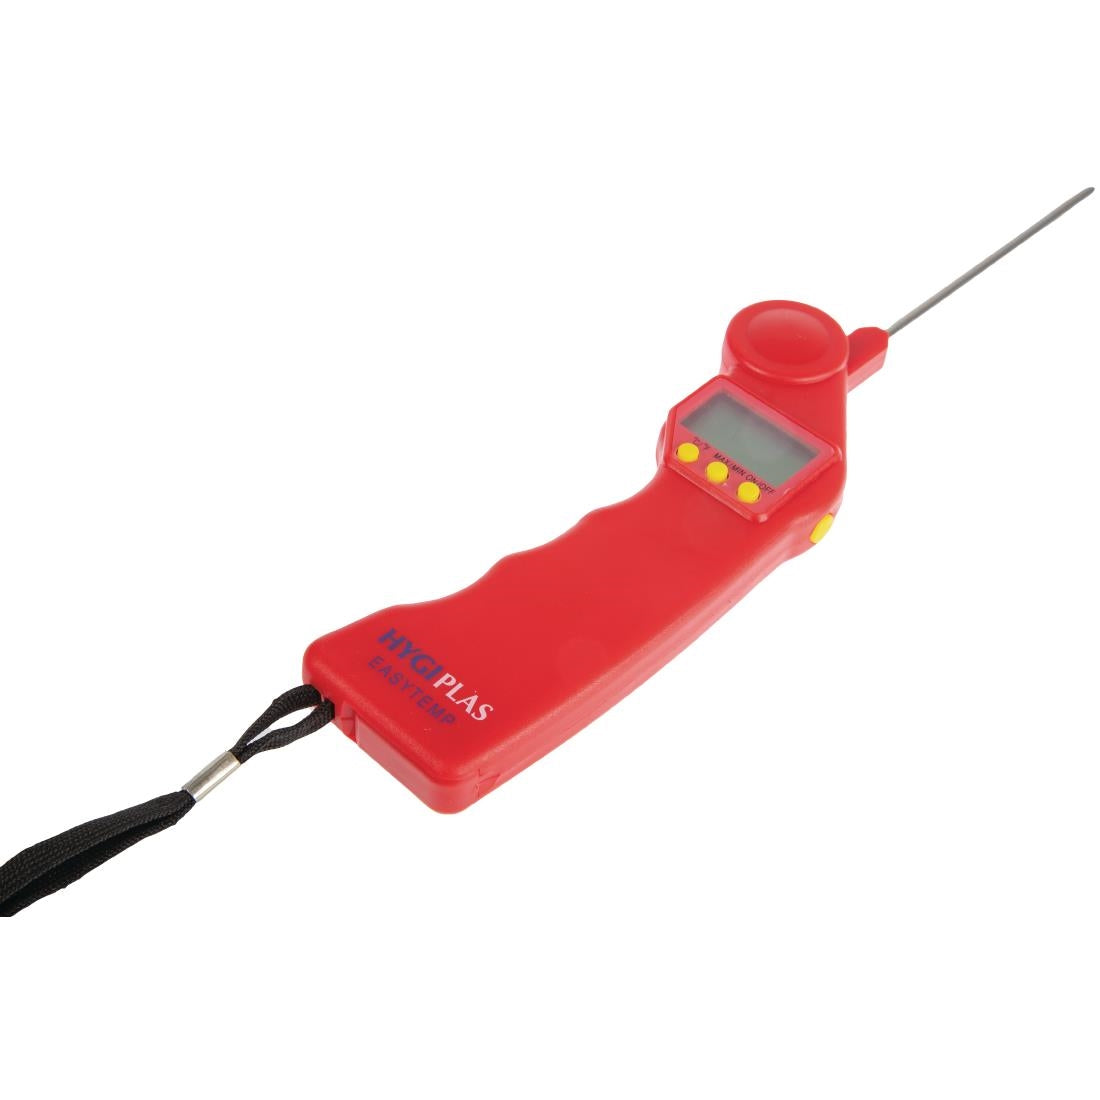 Hygiplas Easytemp Colour Coded Red Thermometer JD Catering Equipment Solutions Ltd